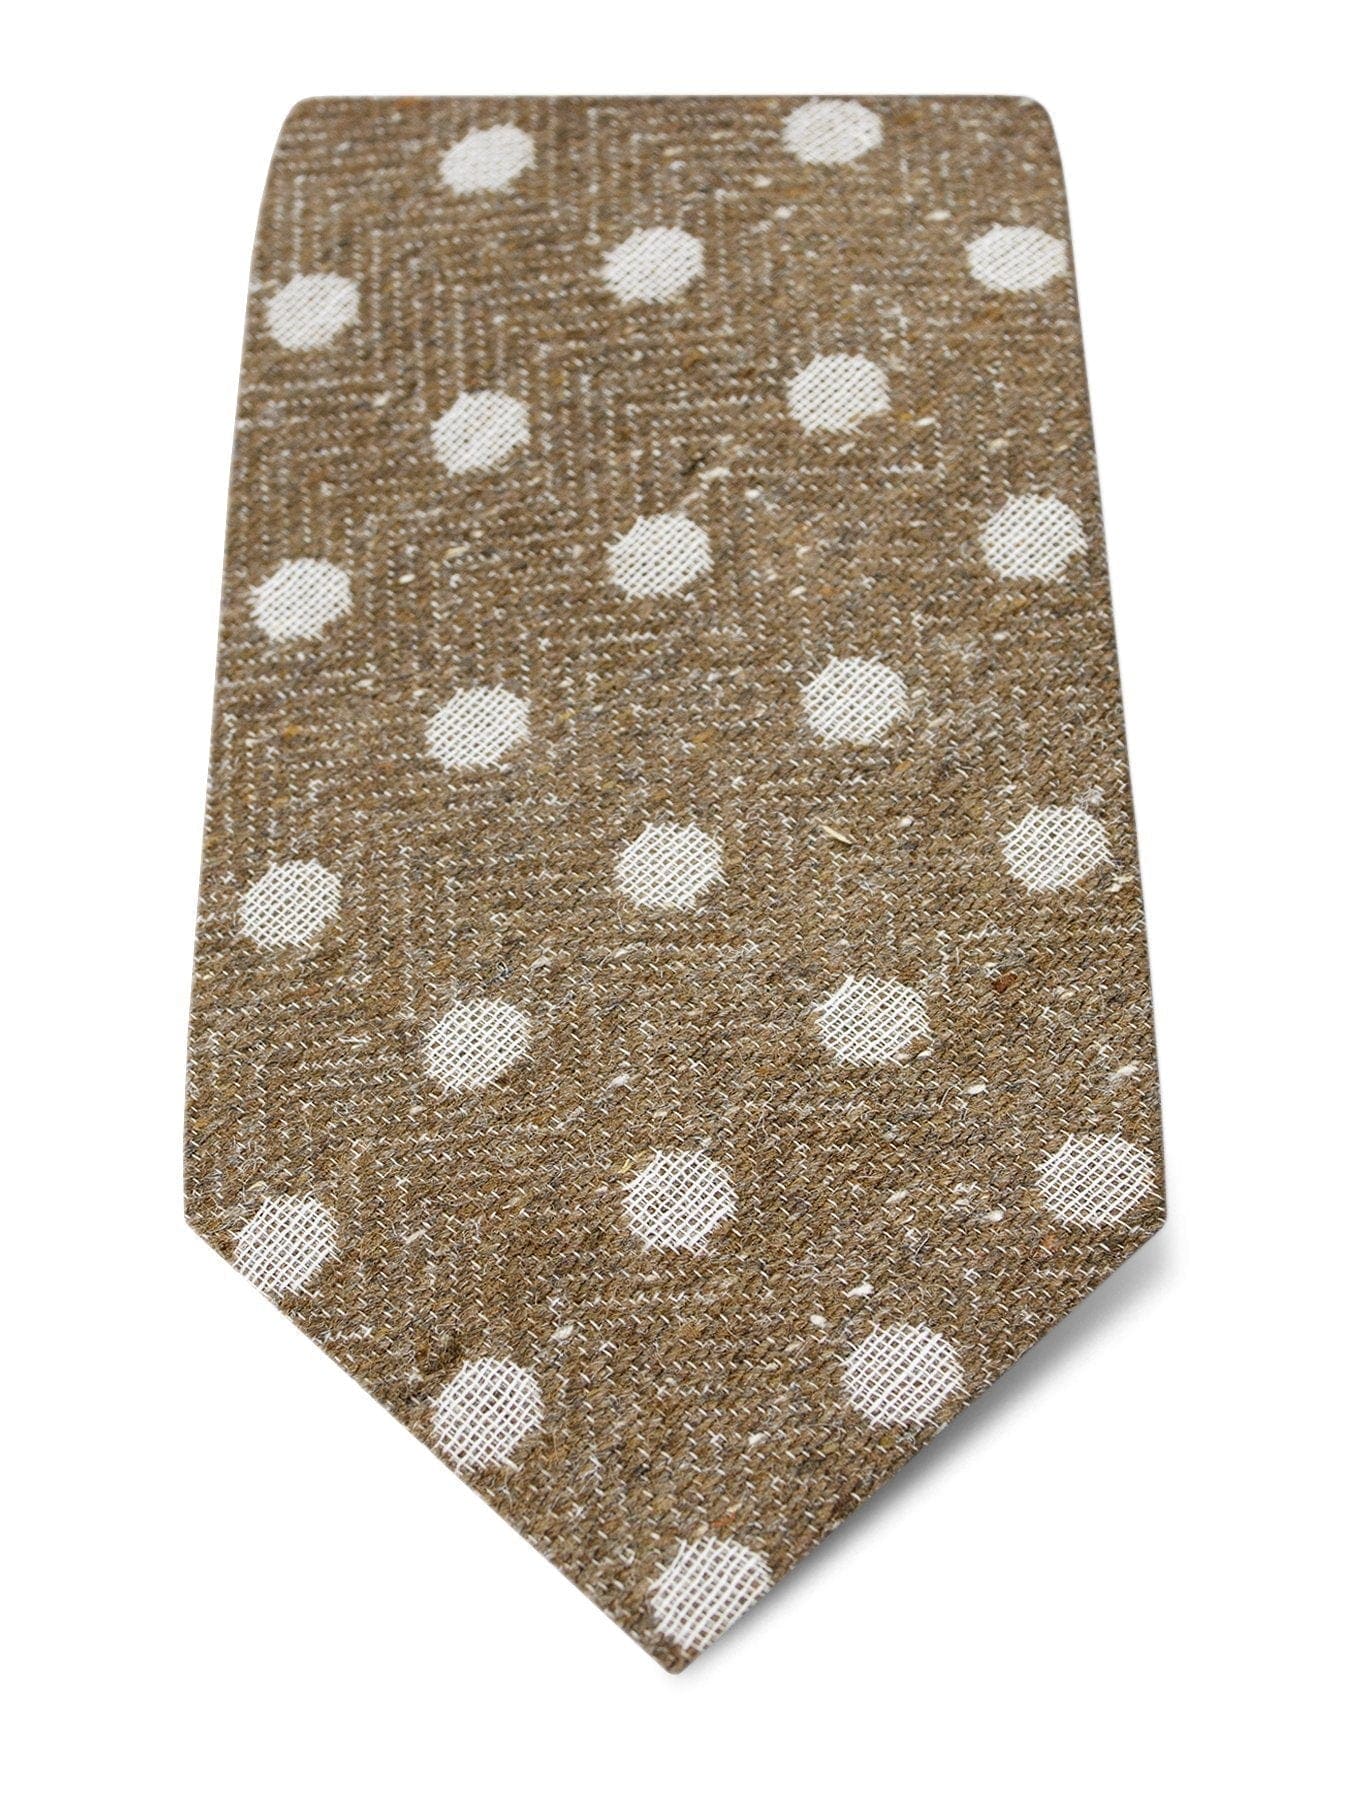 Brown with White Spots Woven Silk & Cotton Tie